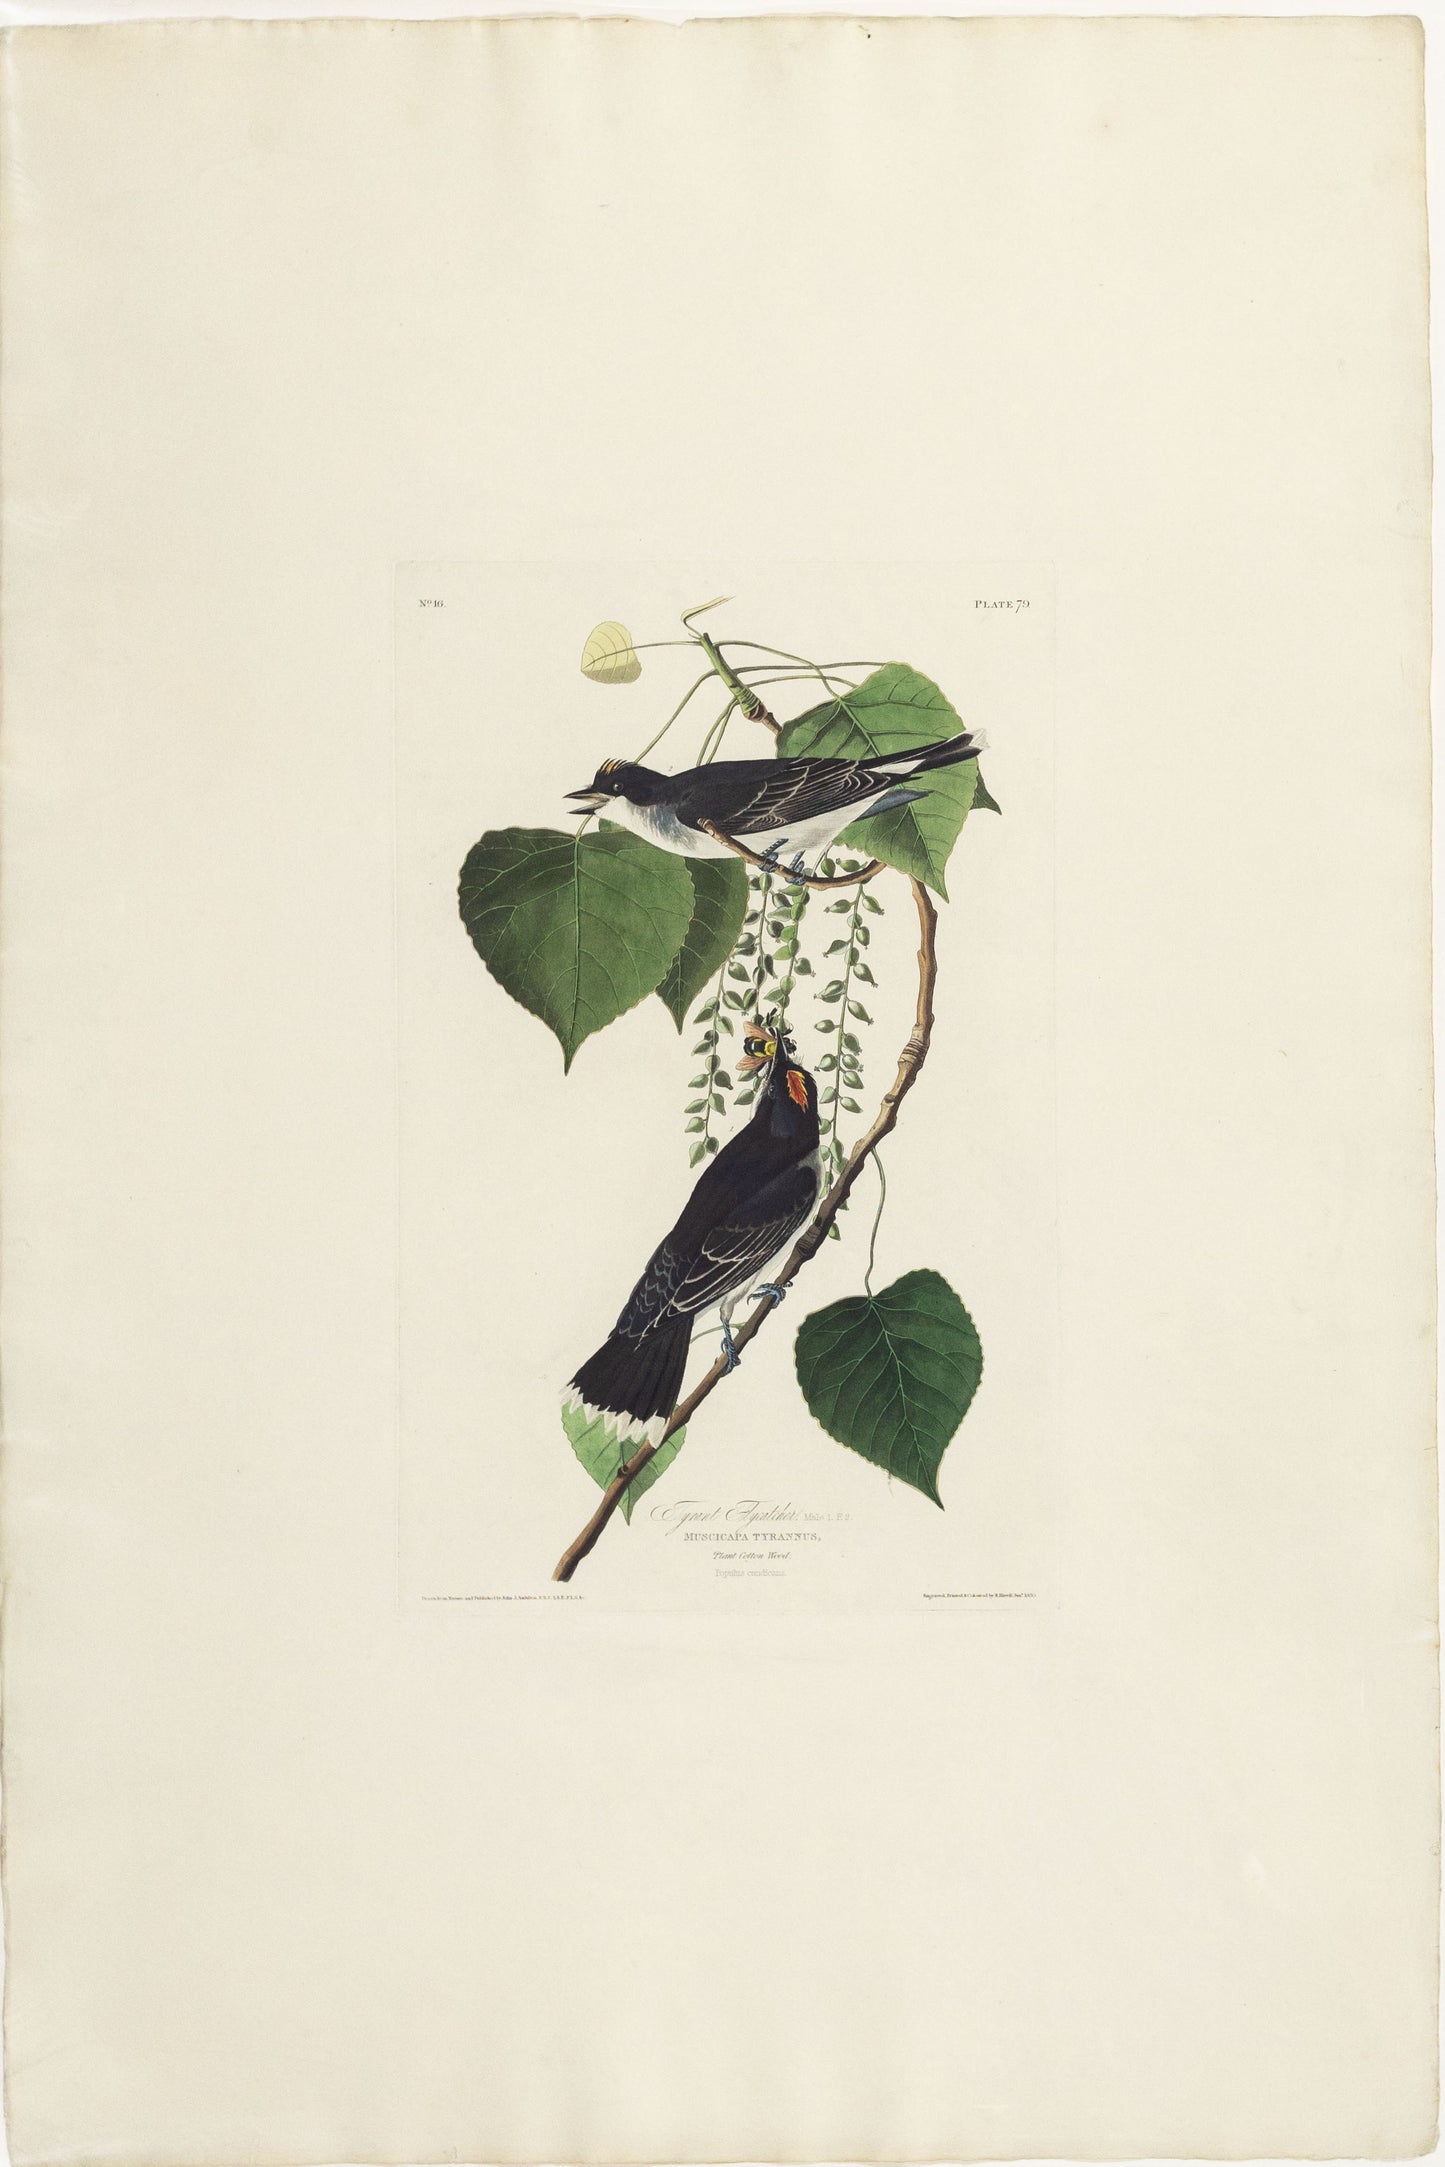 John James Audubon (1785-1851)  Plate LXXIX Tyrant Flycatcher  from Birds of America  Engraved by Robert Havell (1793-1878)  Published: London, 1827-1838  Aquatint engraving with original hand coloring  Paper size: 38 1/2 x 25 1/2" 